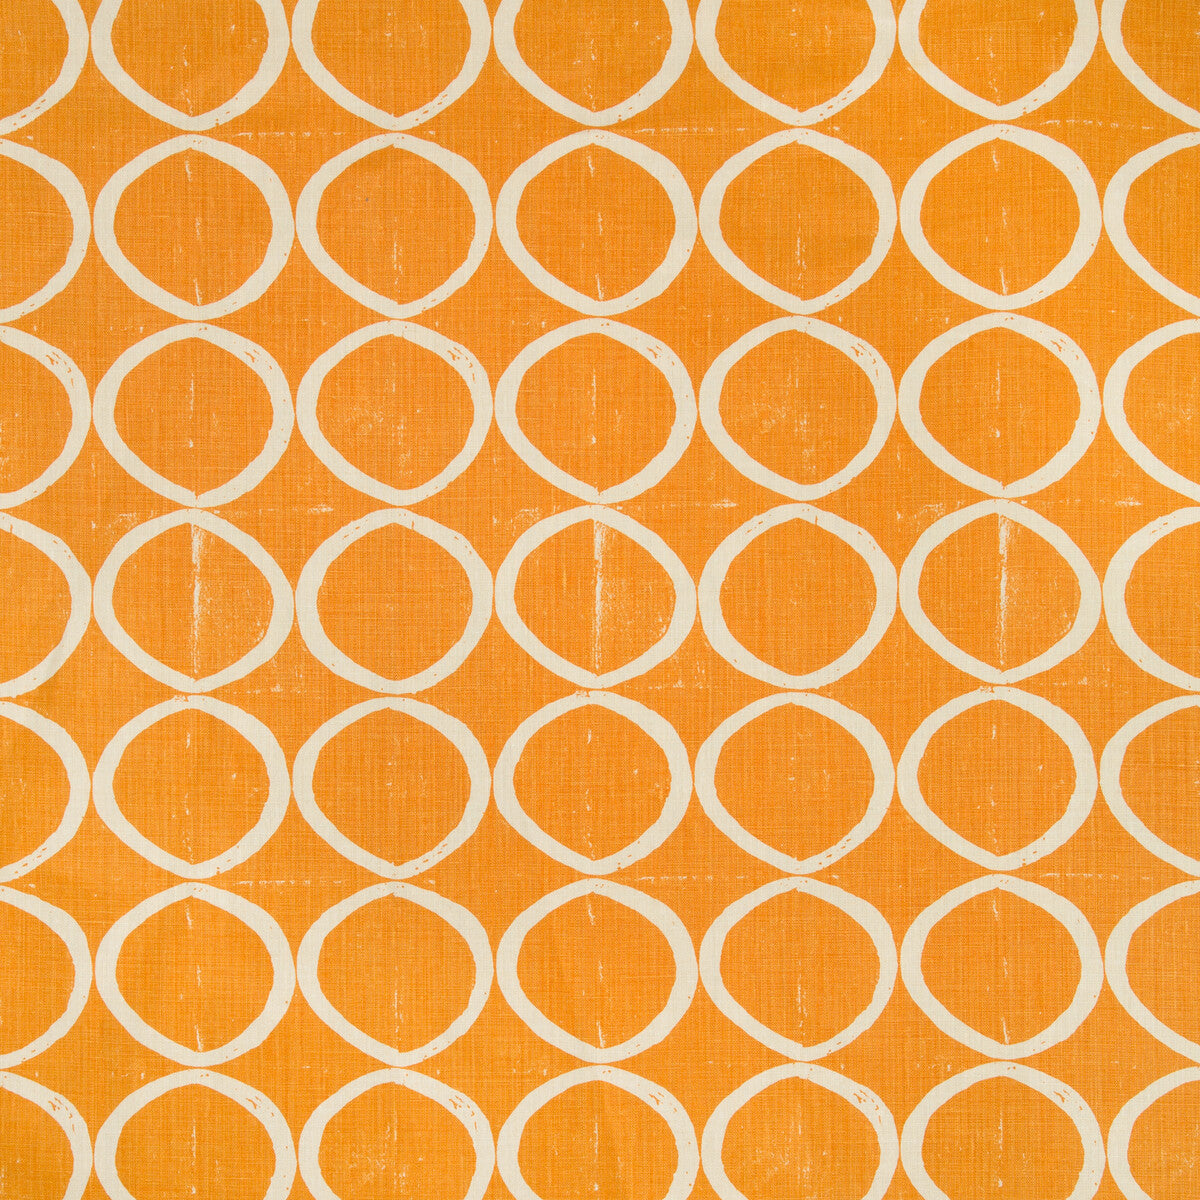 Circles fabric in tangerine color - pattern BFC-3665.12.0 - by Lee Jofa in the Blithfield collection